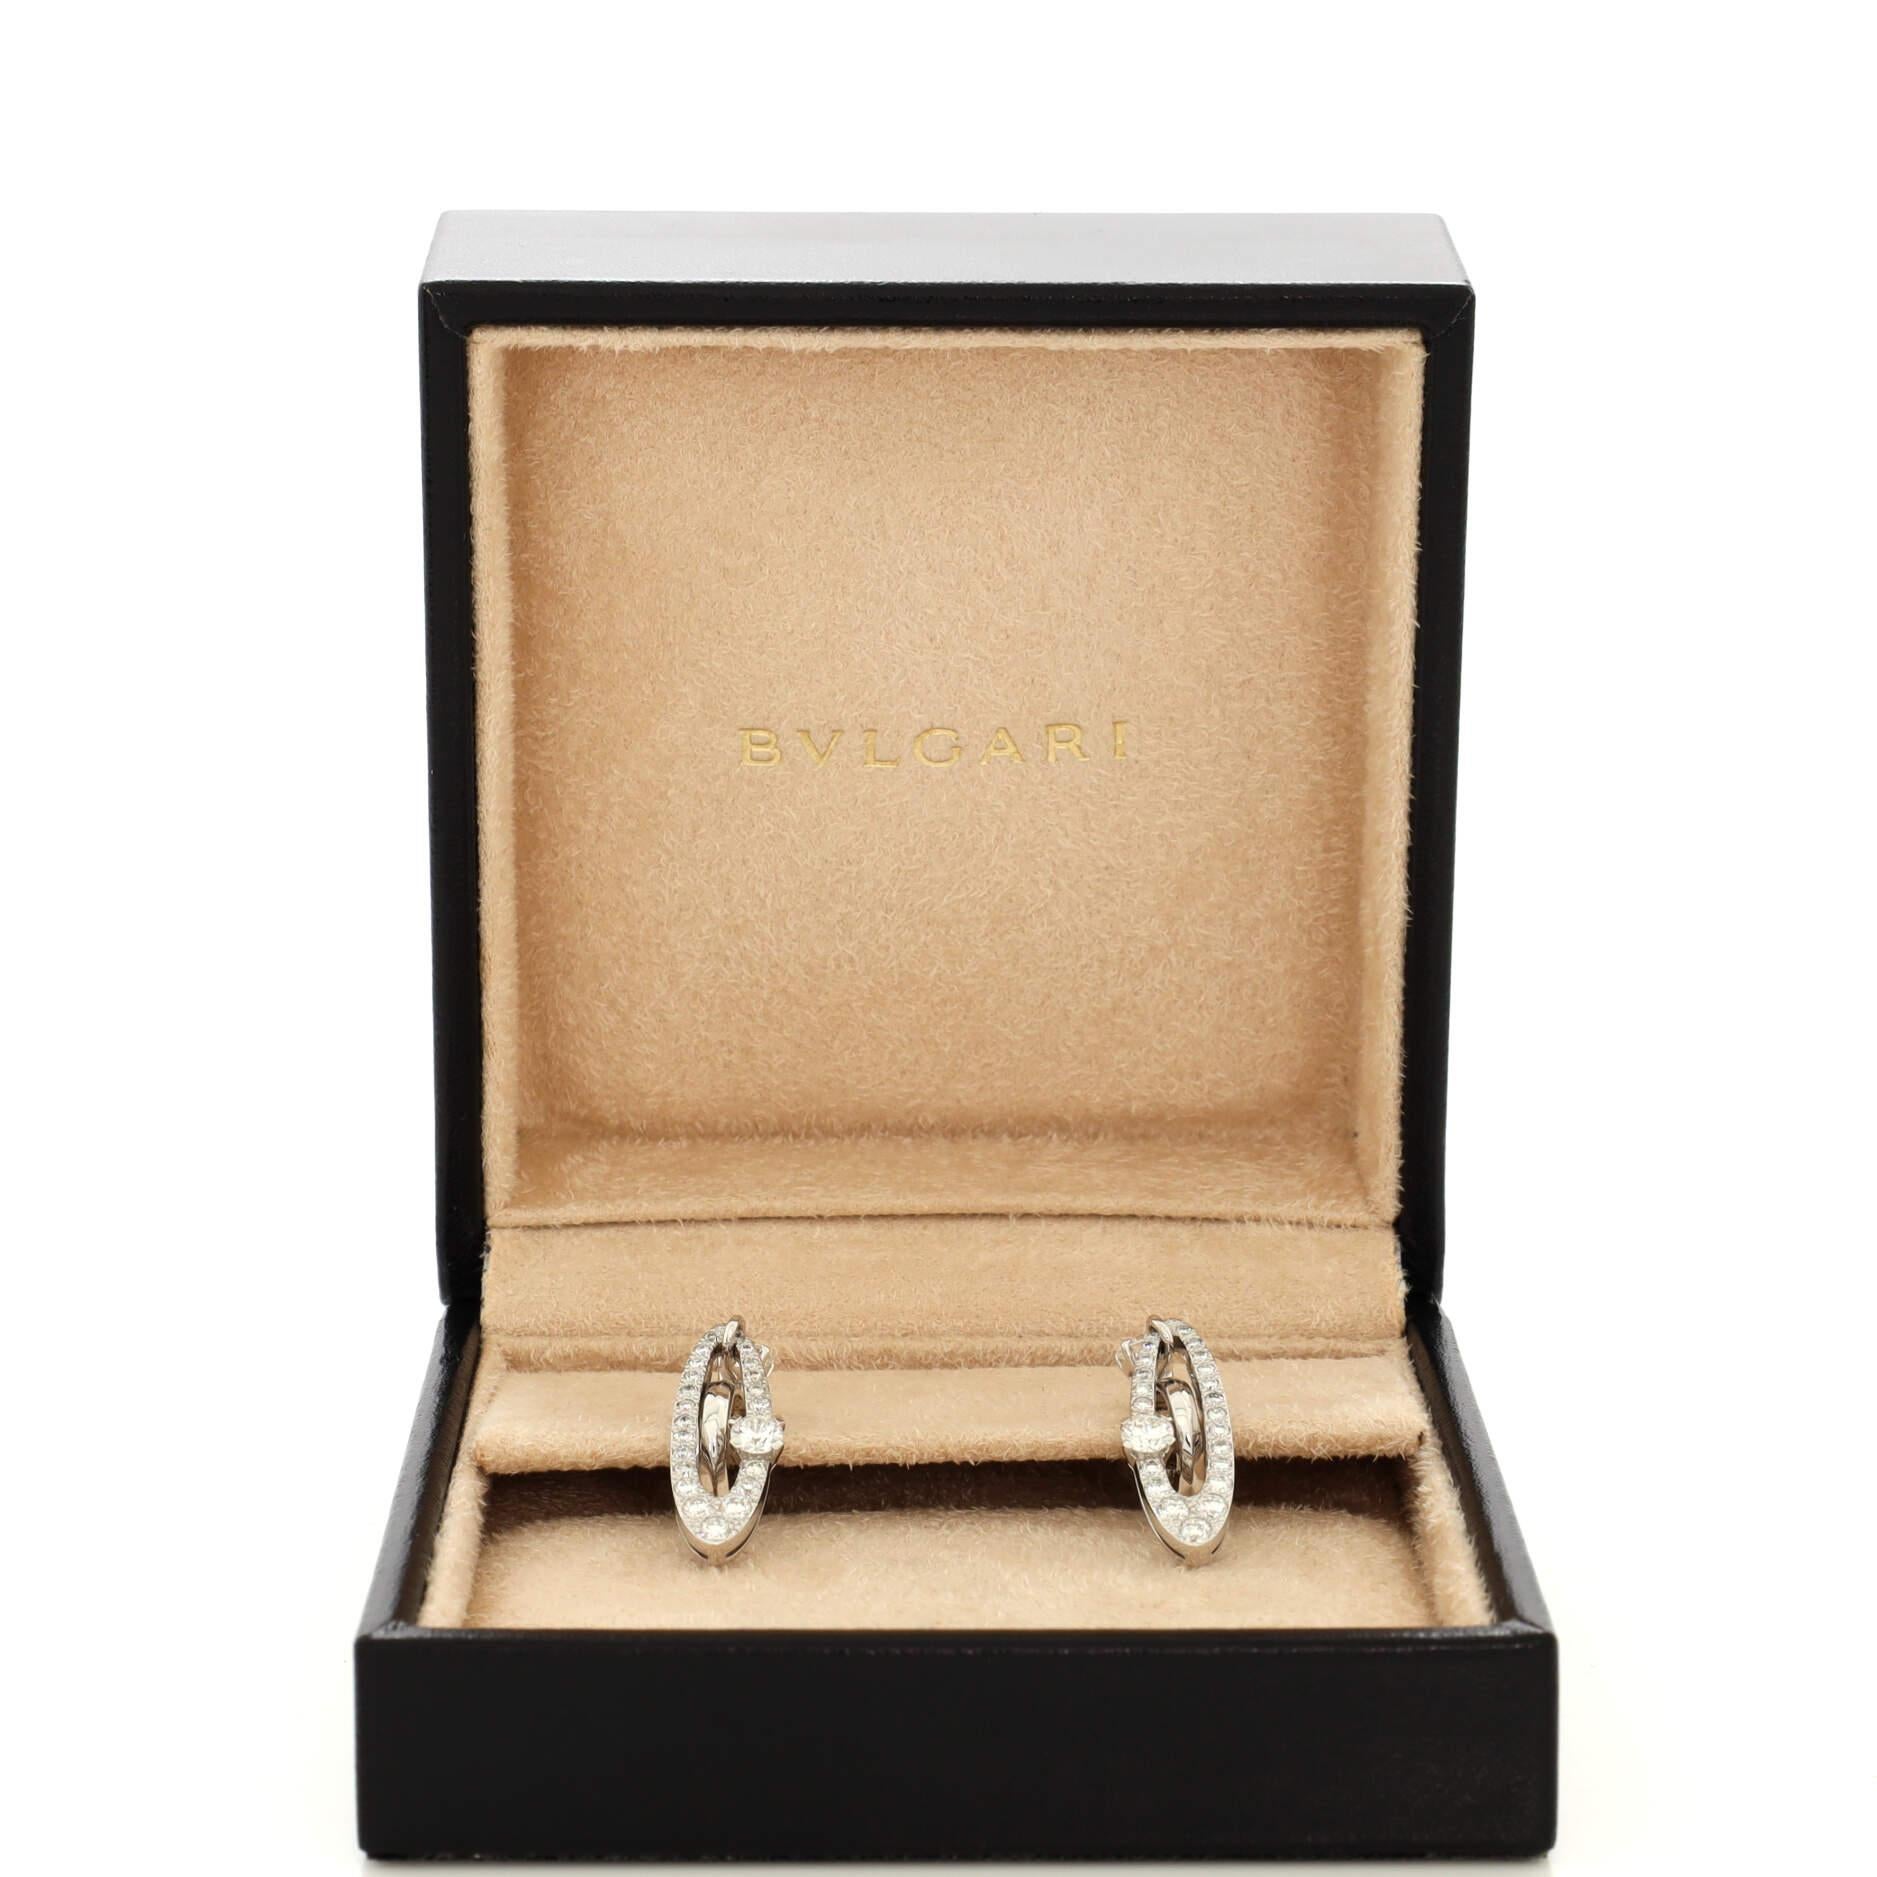 Condition: Great. Minor wear throughout.
Accessories: No Accessories
Measurements: Height/Length: 30.30 mm, Width: 8.35 mm
Designer: Bvlgari
Model: Elisia Drop Earrings 18K White Gold and Diamonds
Exterior Color: White Gold
Item Number: 214796/2